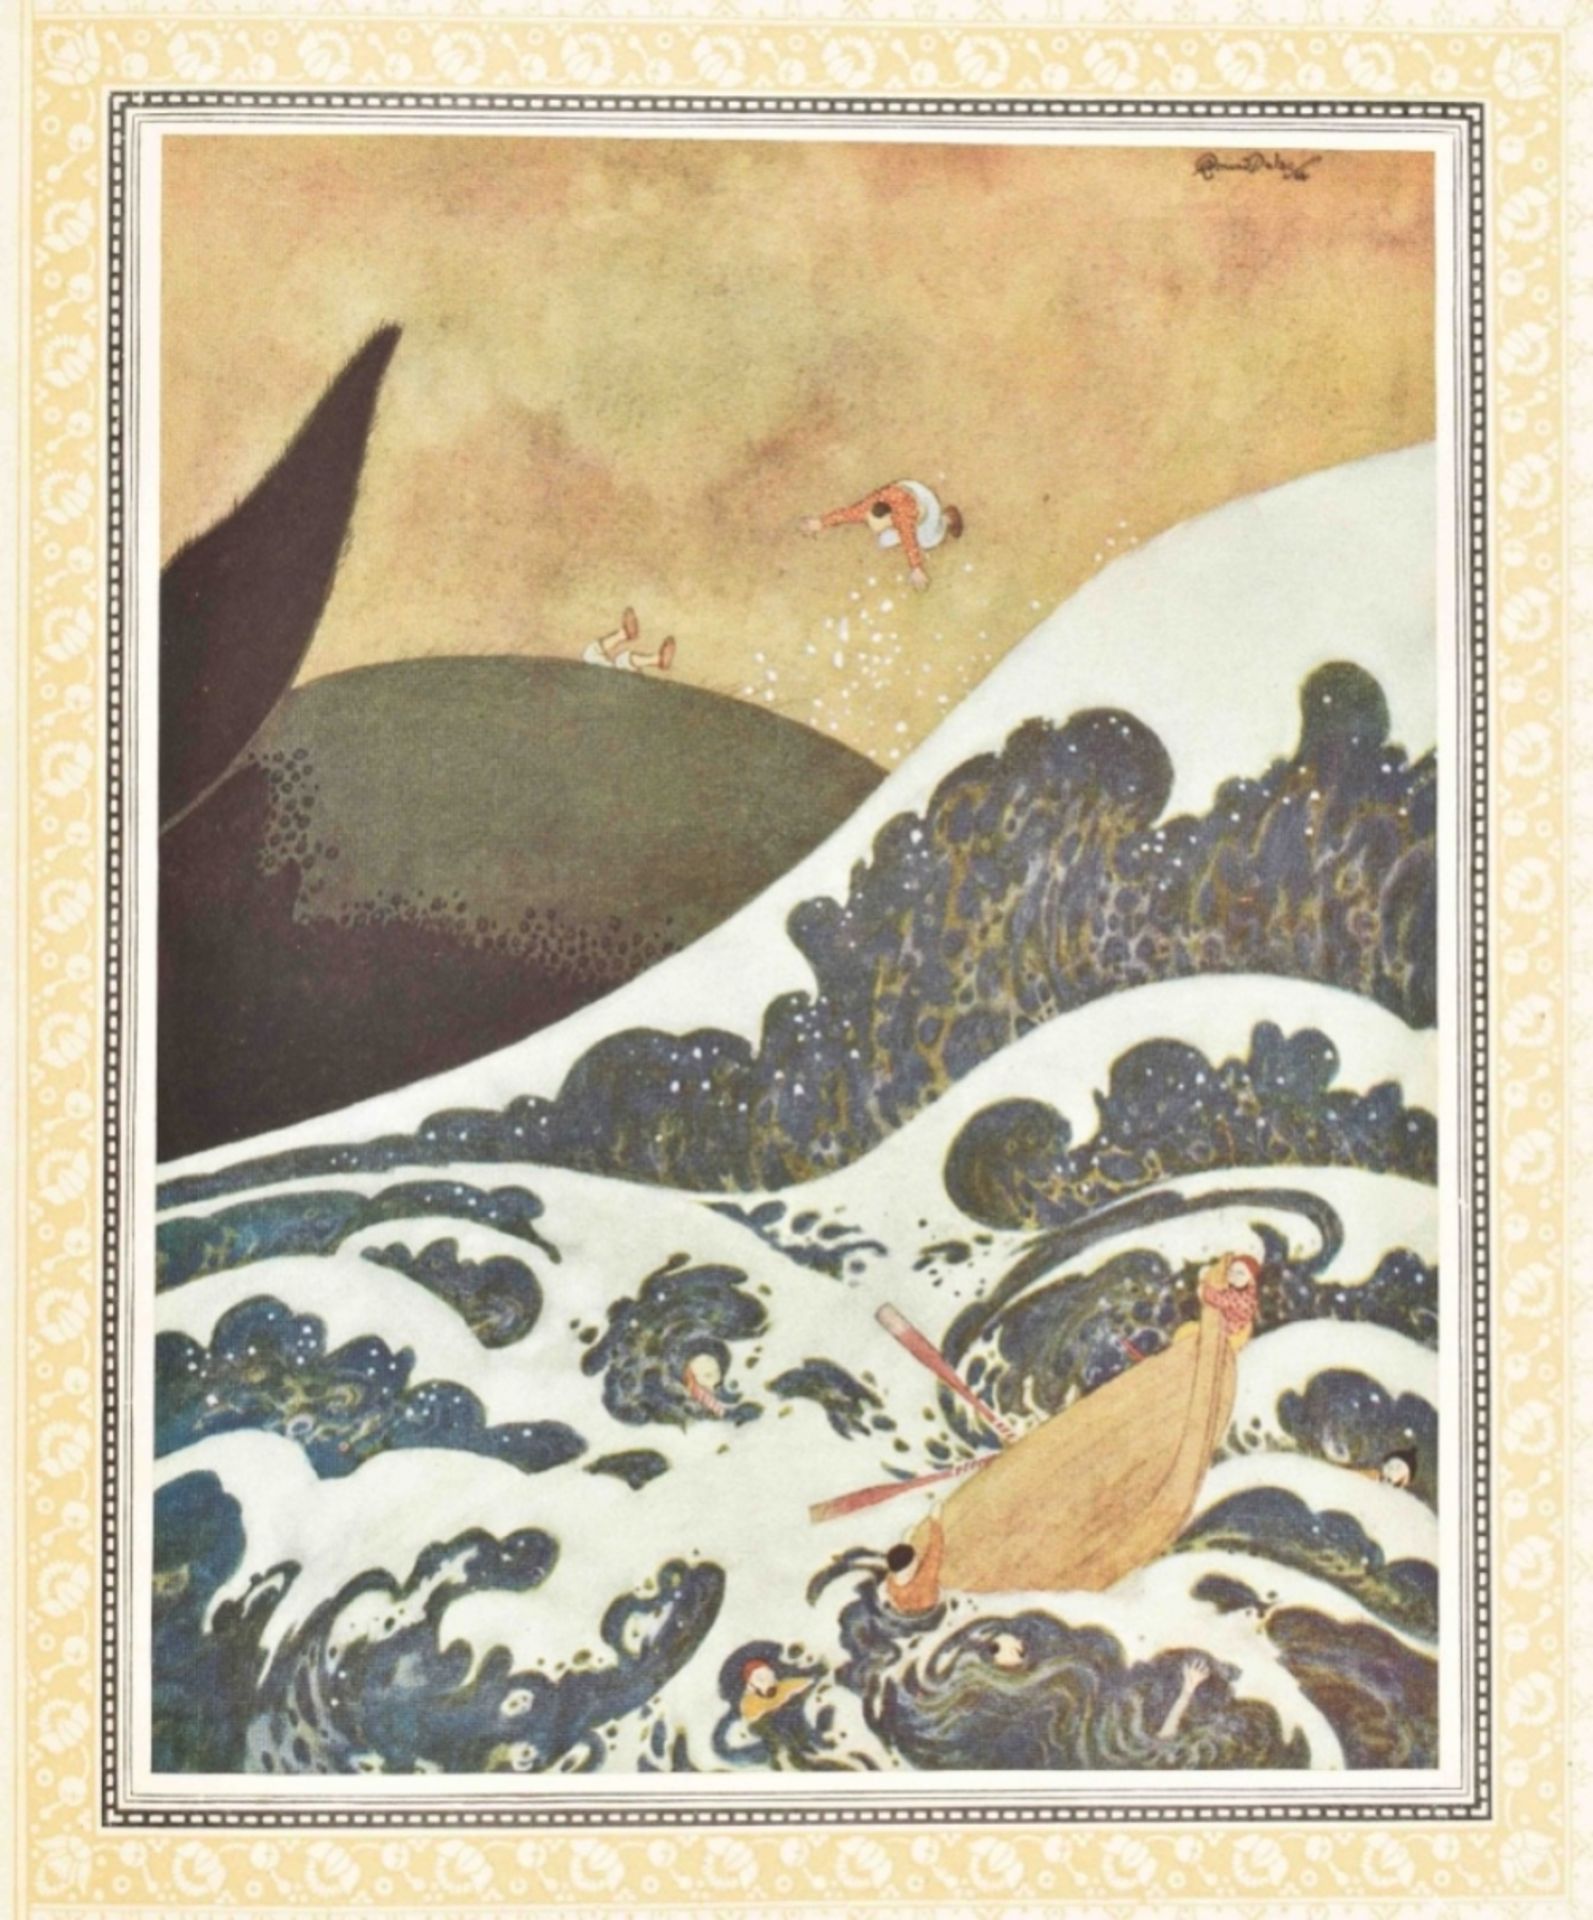 Sindbad the Sailor & other stories from the Arabian Nights - Image 2 of 5